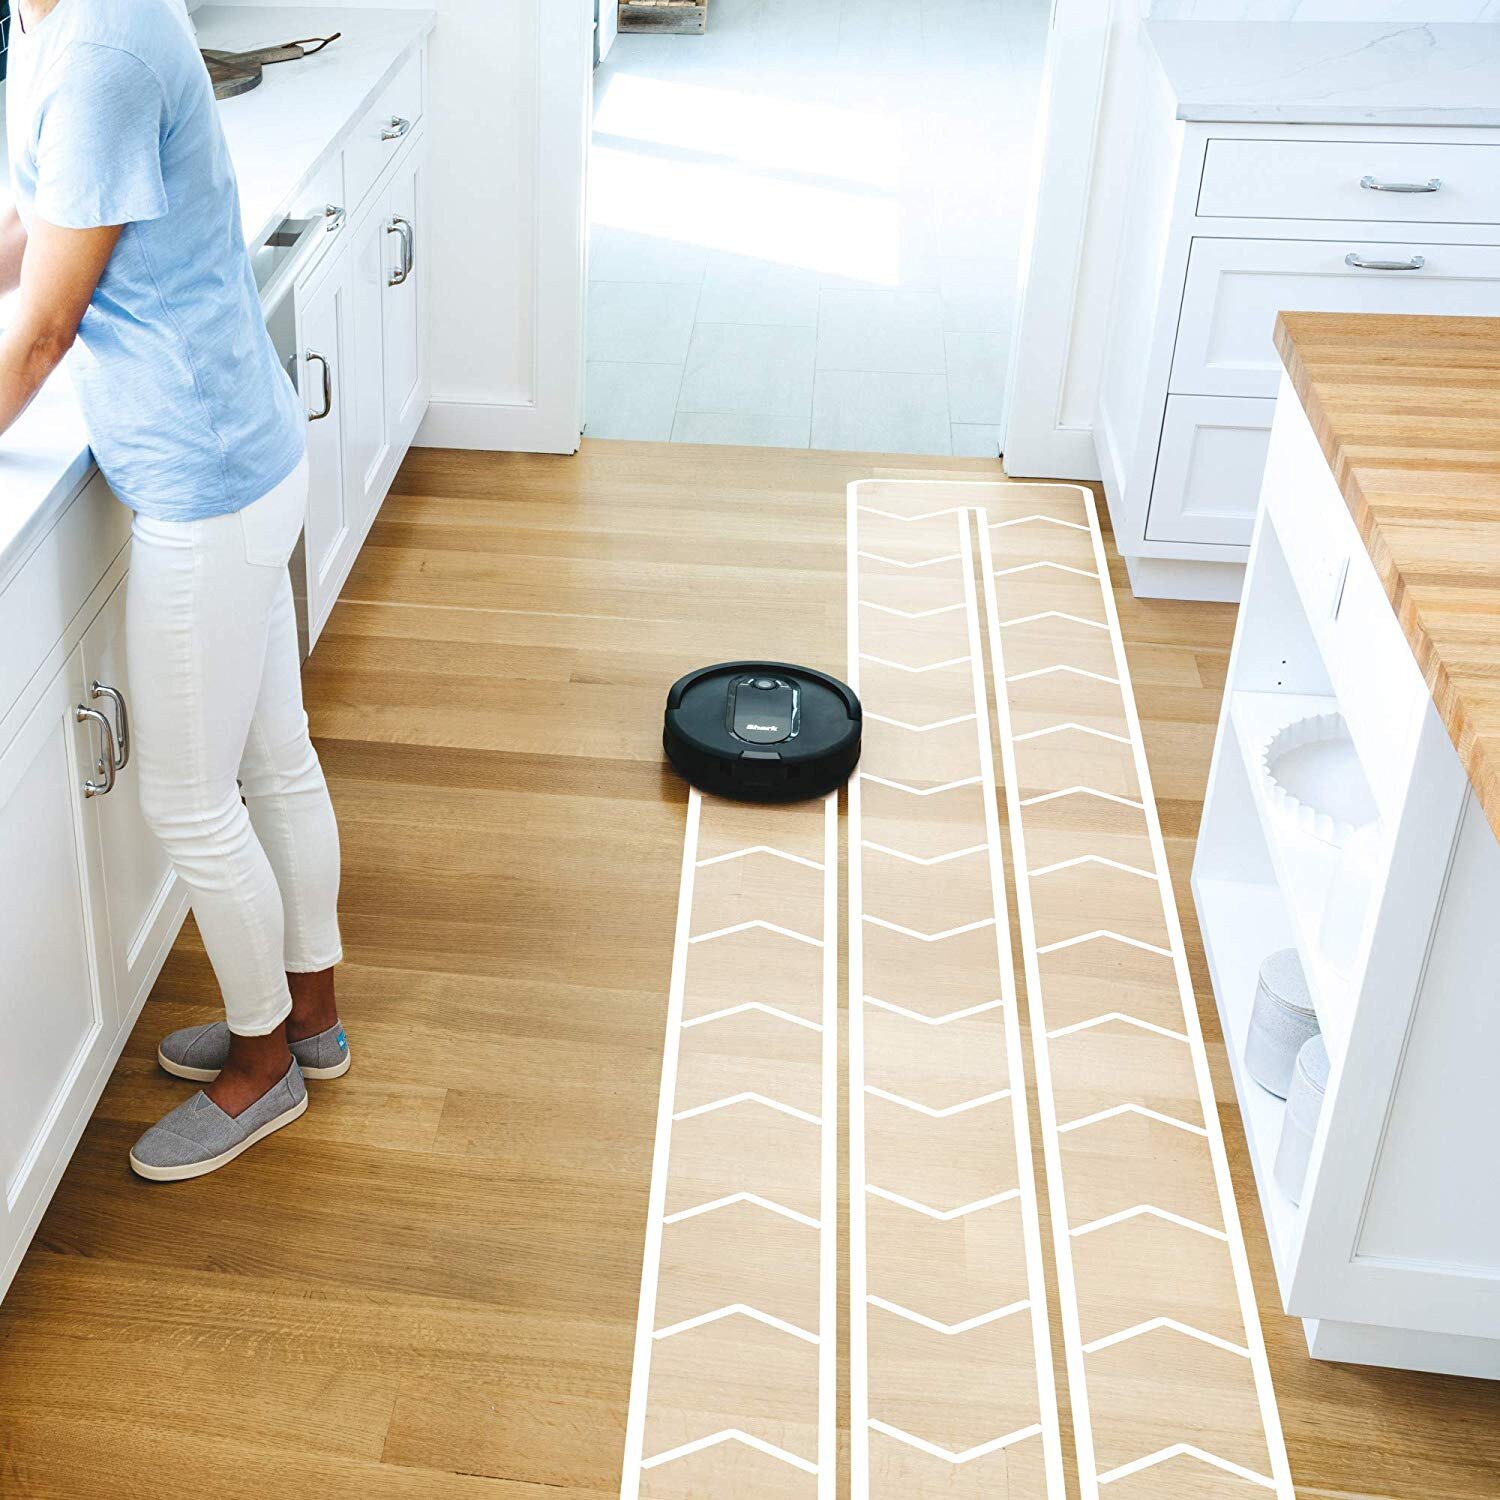 Best Robot Vacuums For Laminate Floors, Is Roomba Safe For Laminate Floors